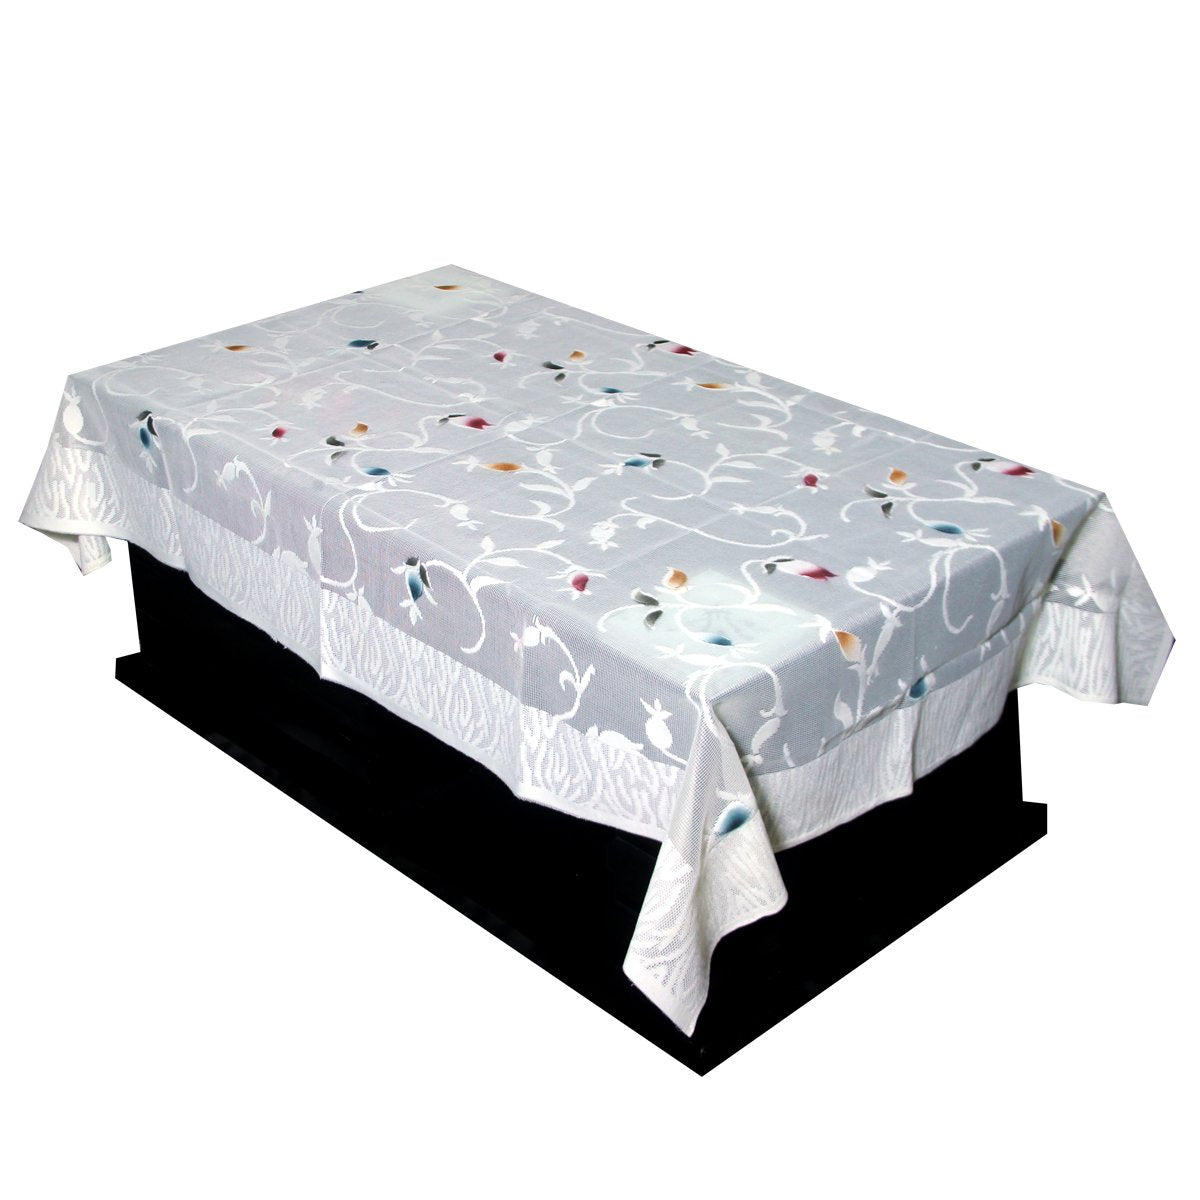 Kuber Industries Cotton 4 Seater Center Table Cover - Cream (CenterflowerCTC014)